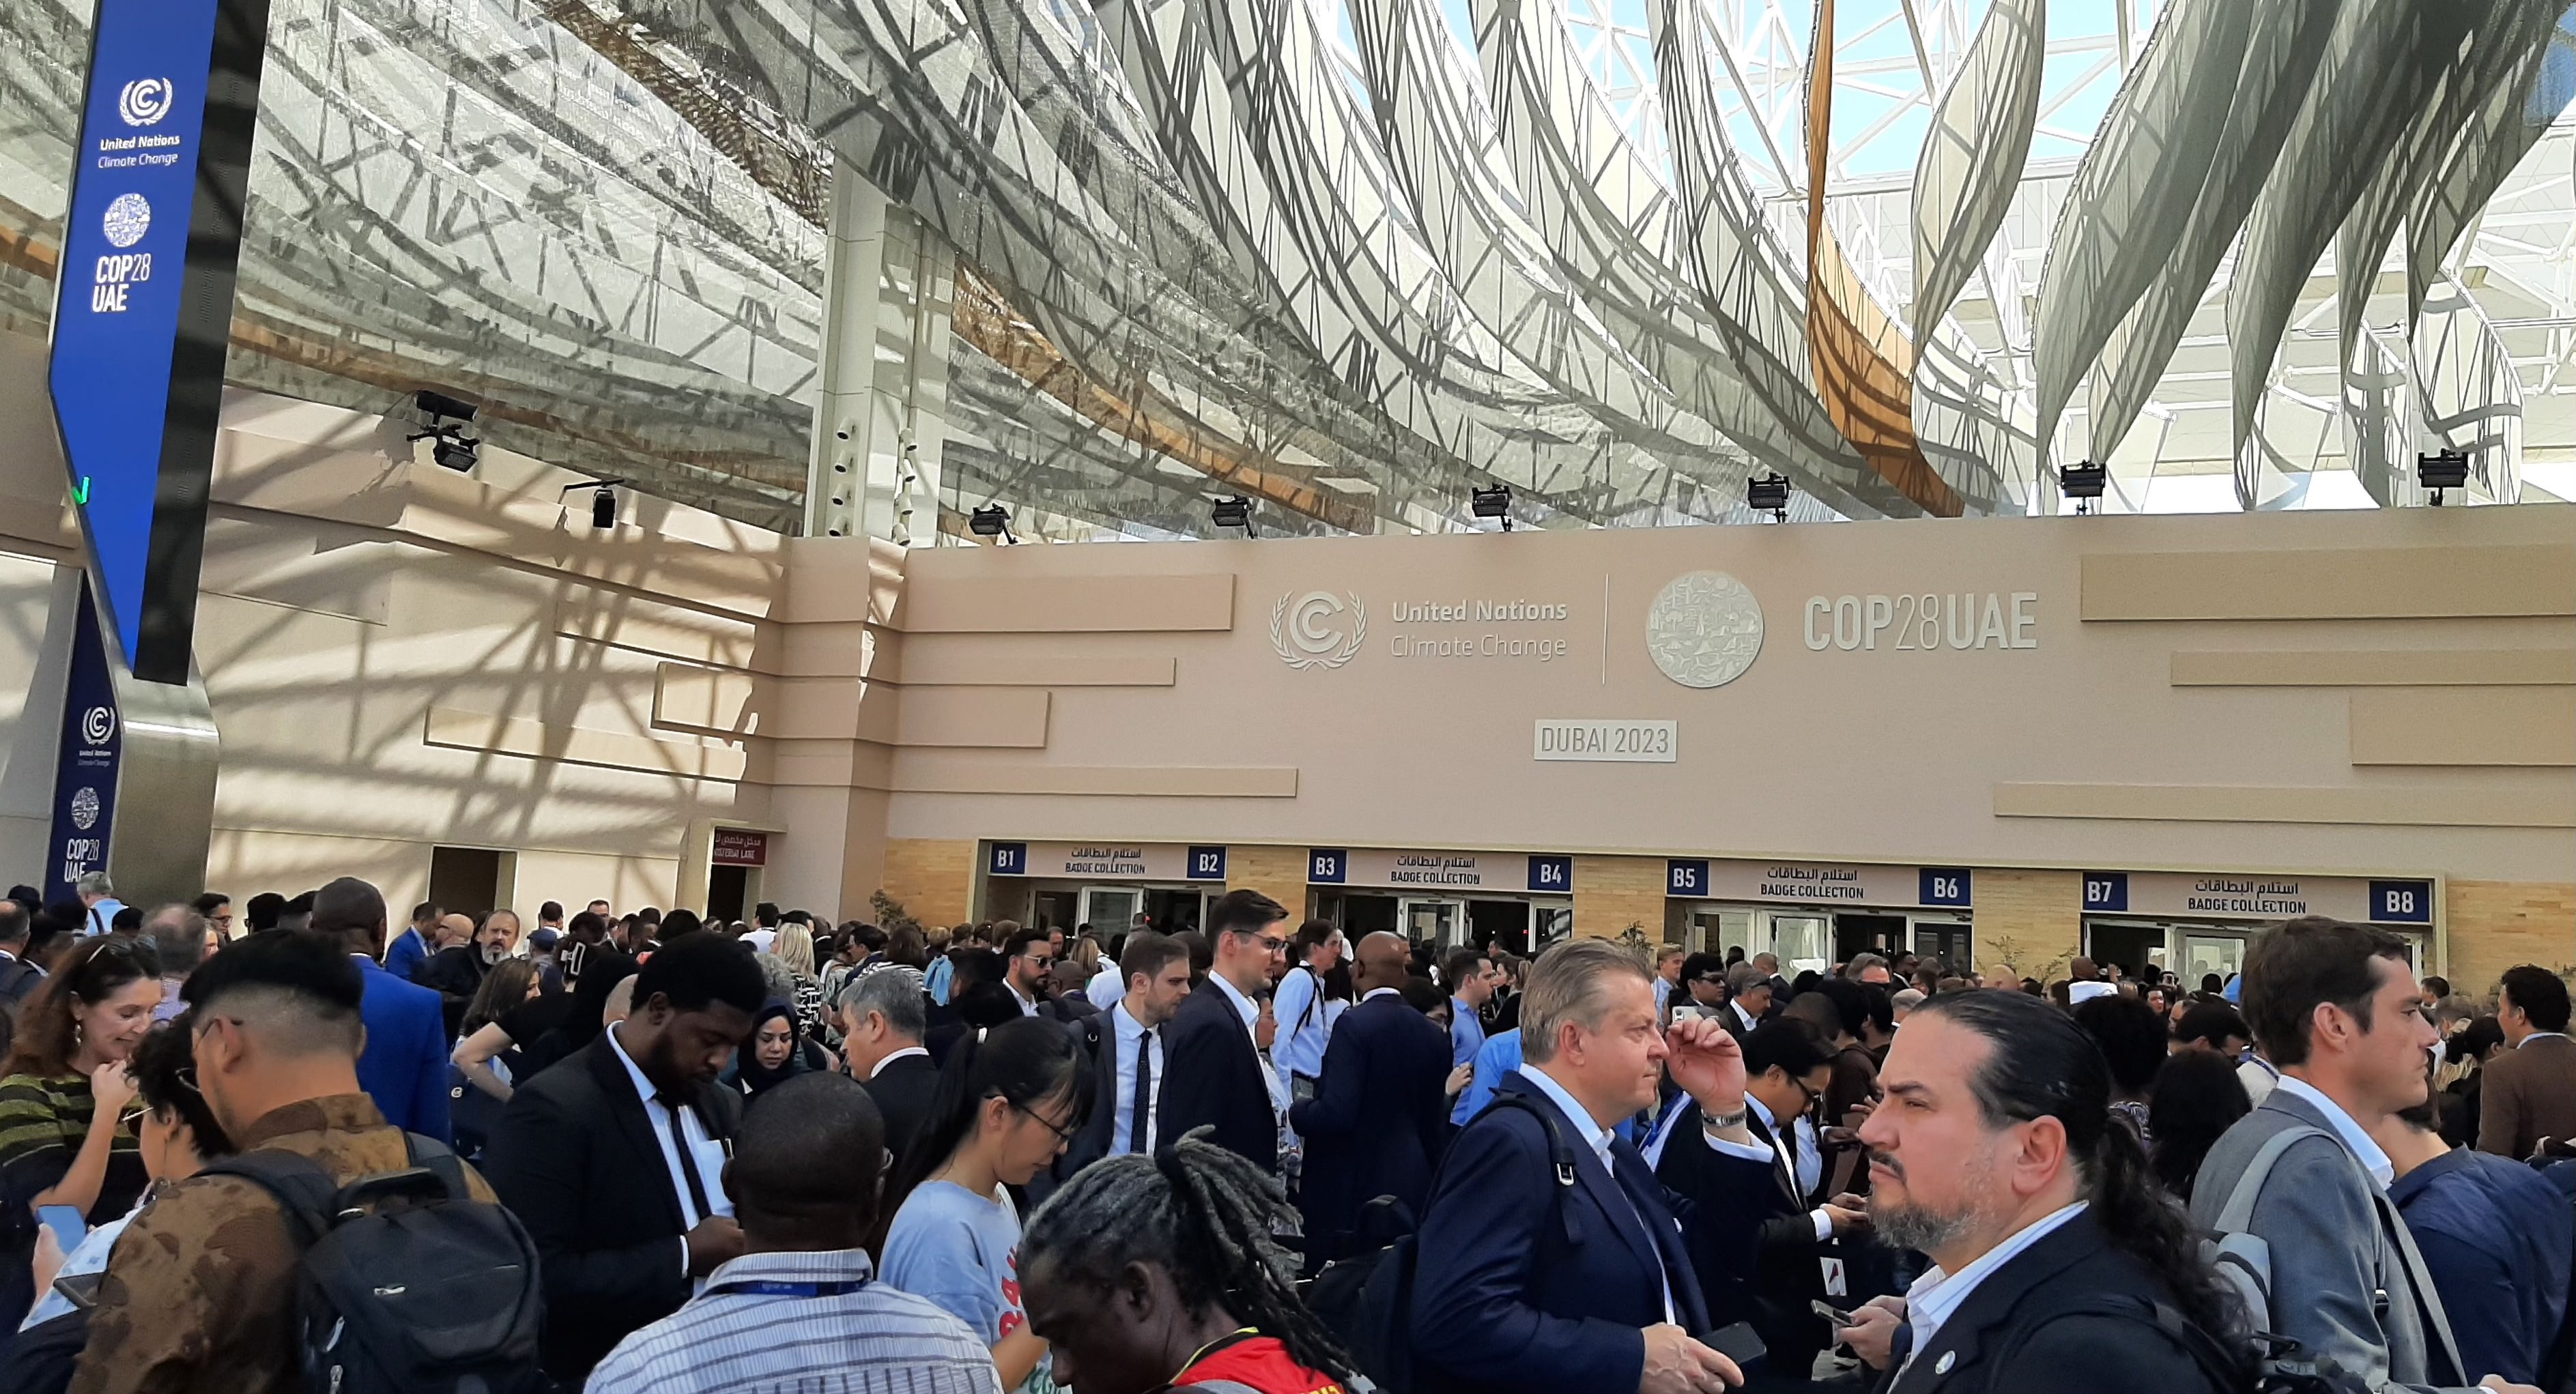 Delegates to COP28 Blue Zone queue for passes at the entrance to the Dubai exhibition centre